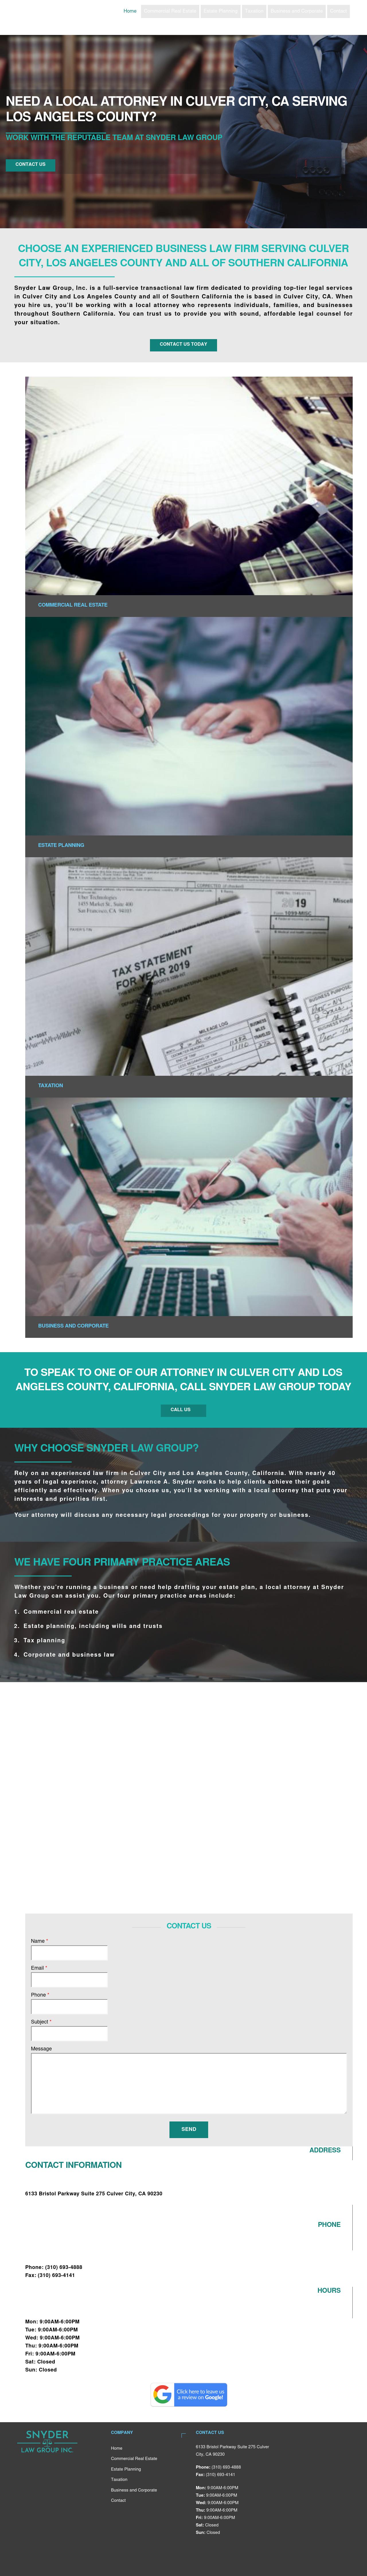 Snyder Law Group, Inc. - Culver City CA Lawyers